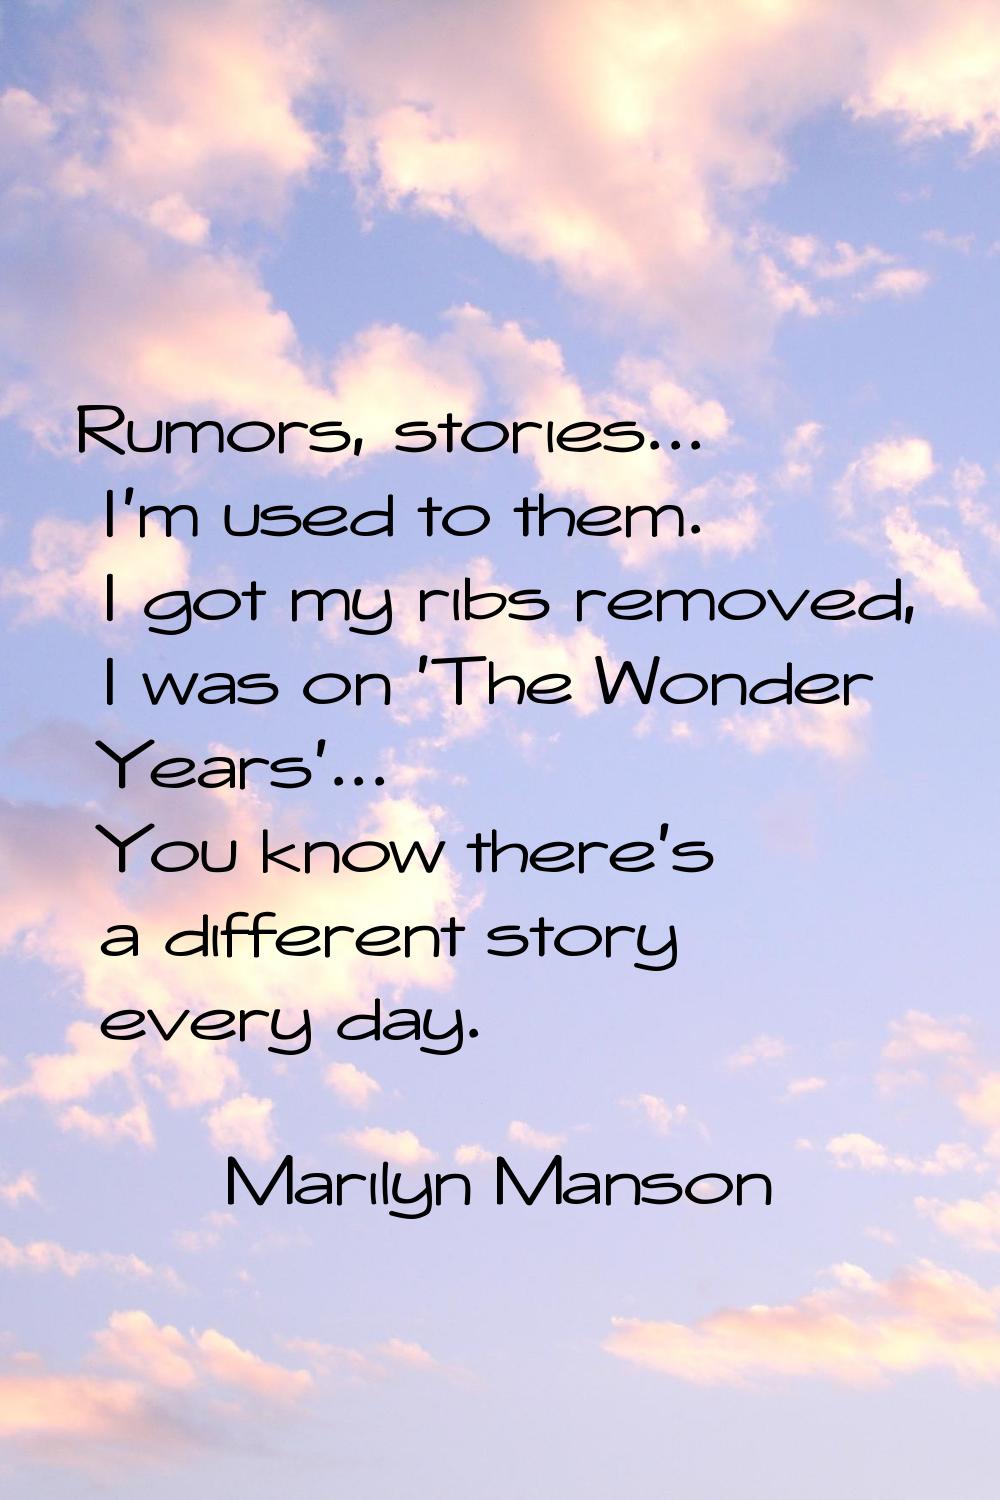 Rumors, stories... I'm used to them. I got my ribs removed, I was on 'The Wonder Years'... You know